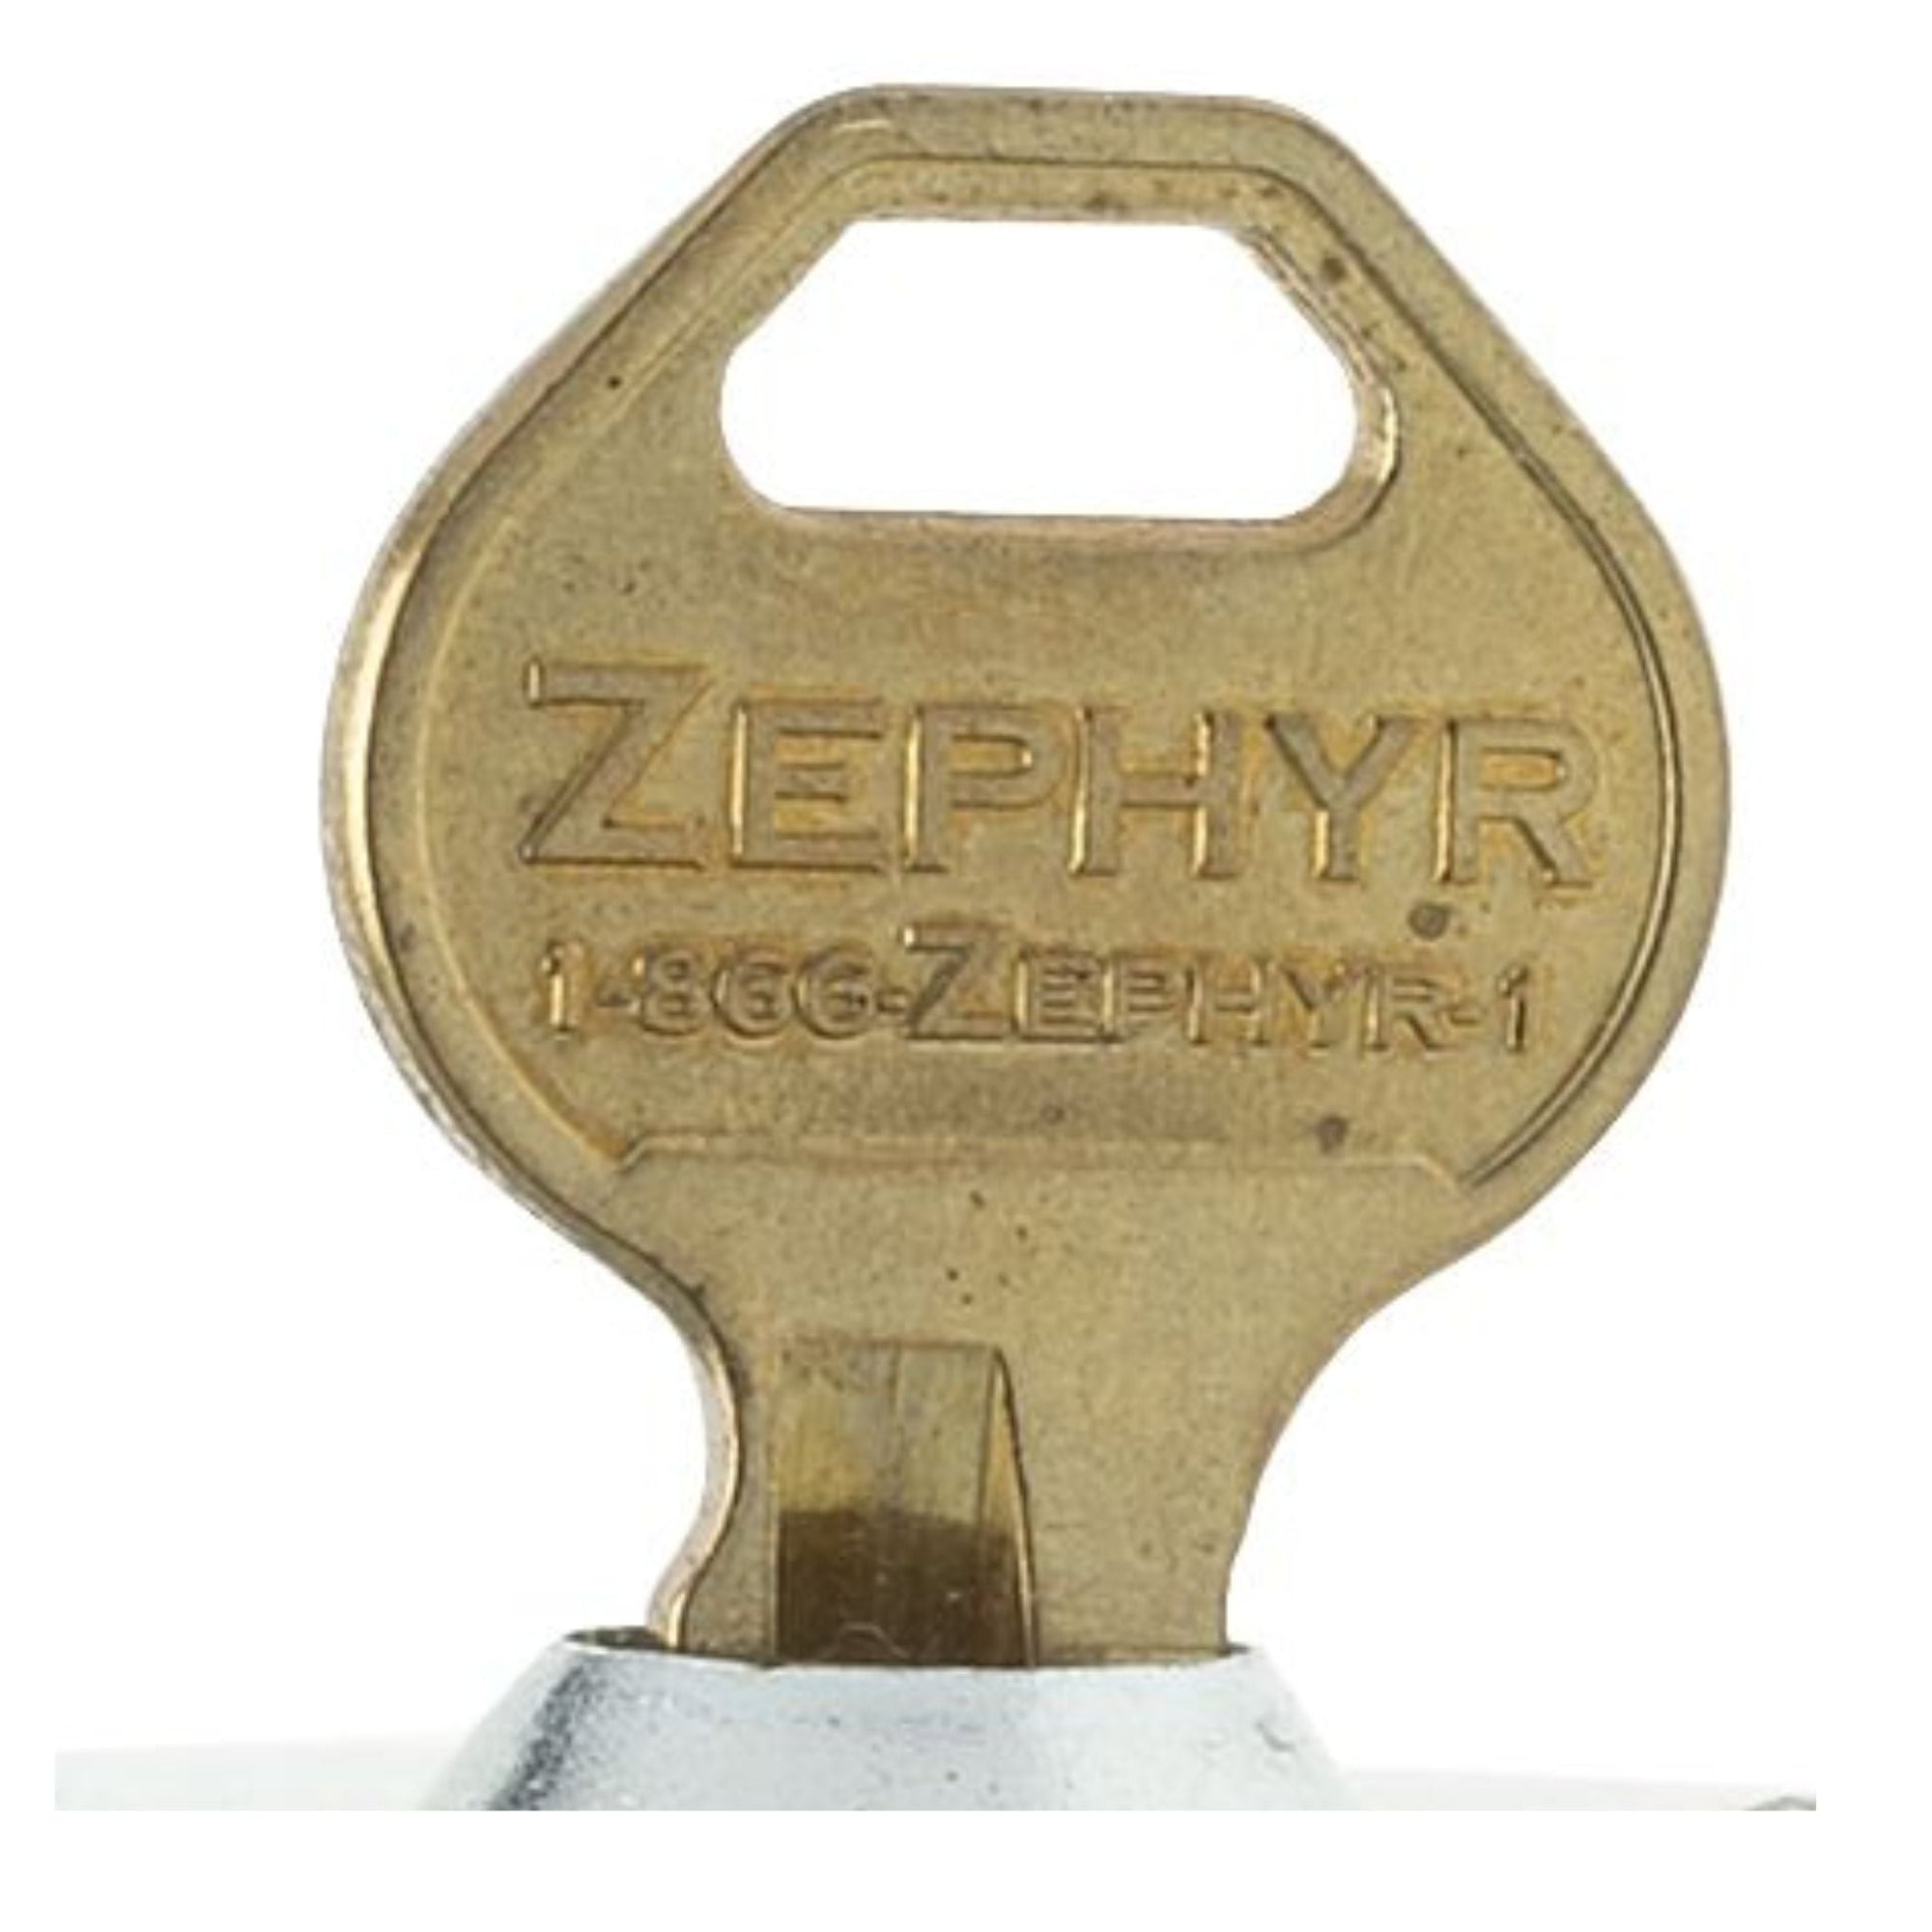 Zephyr Control Key for 1954 and 1955 Series Built In Combination Locker Locks with Spring Latch Bolts - The Lock Source